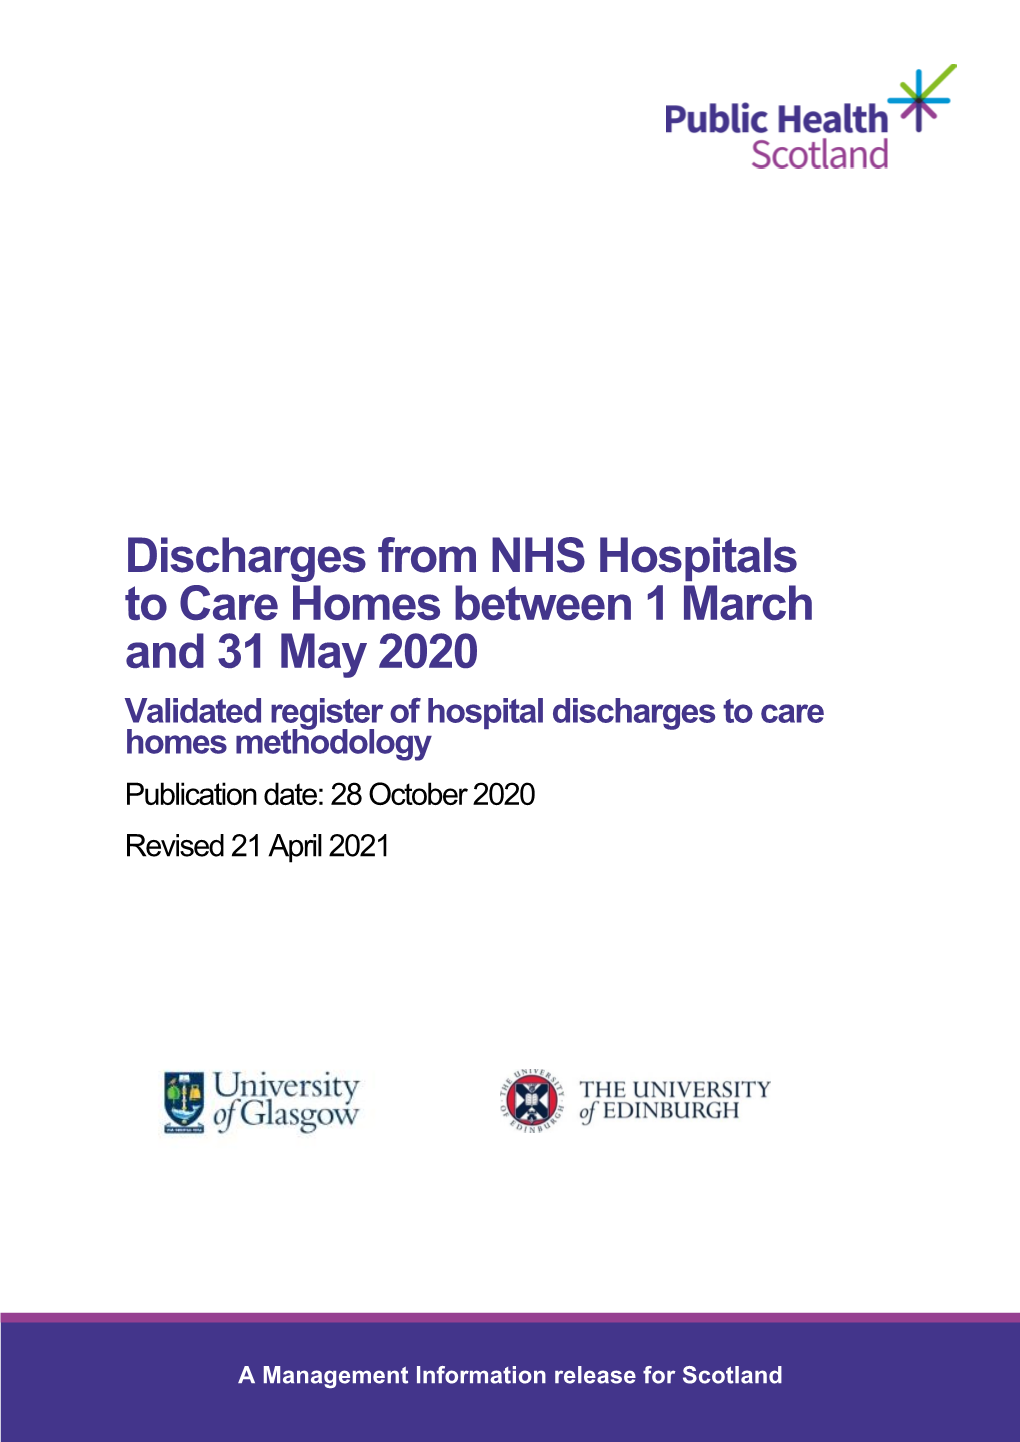 Discharges from NHS Hospitals to Care Homes Between 1 March and 31 May 2020